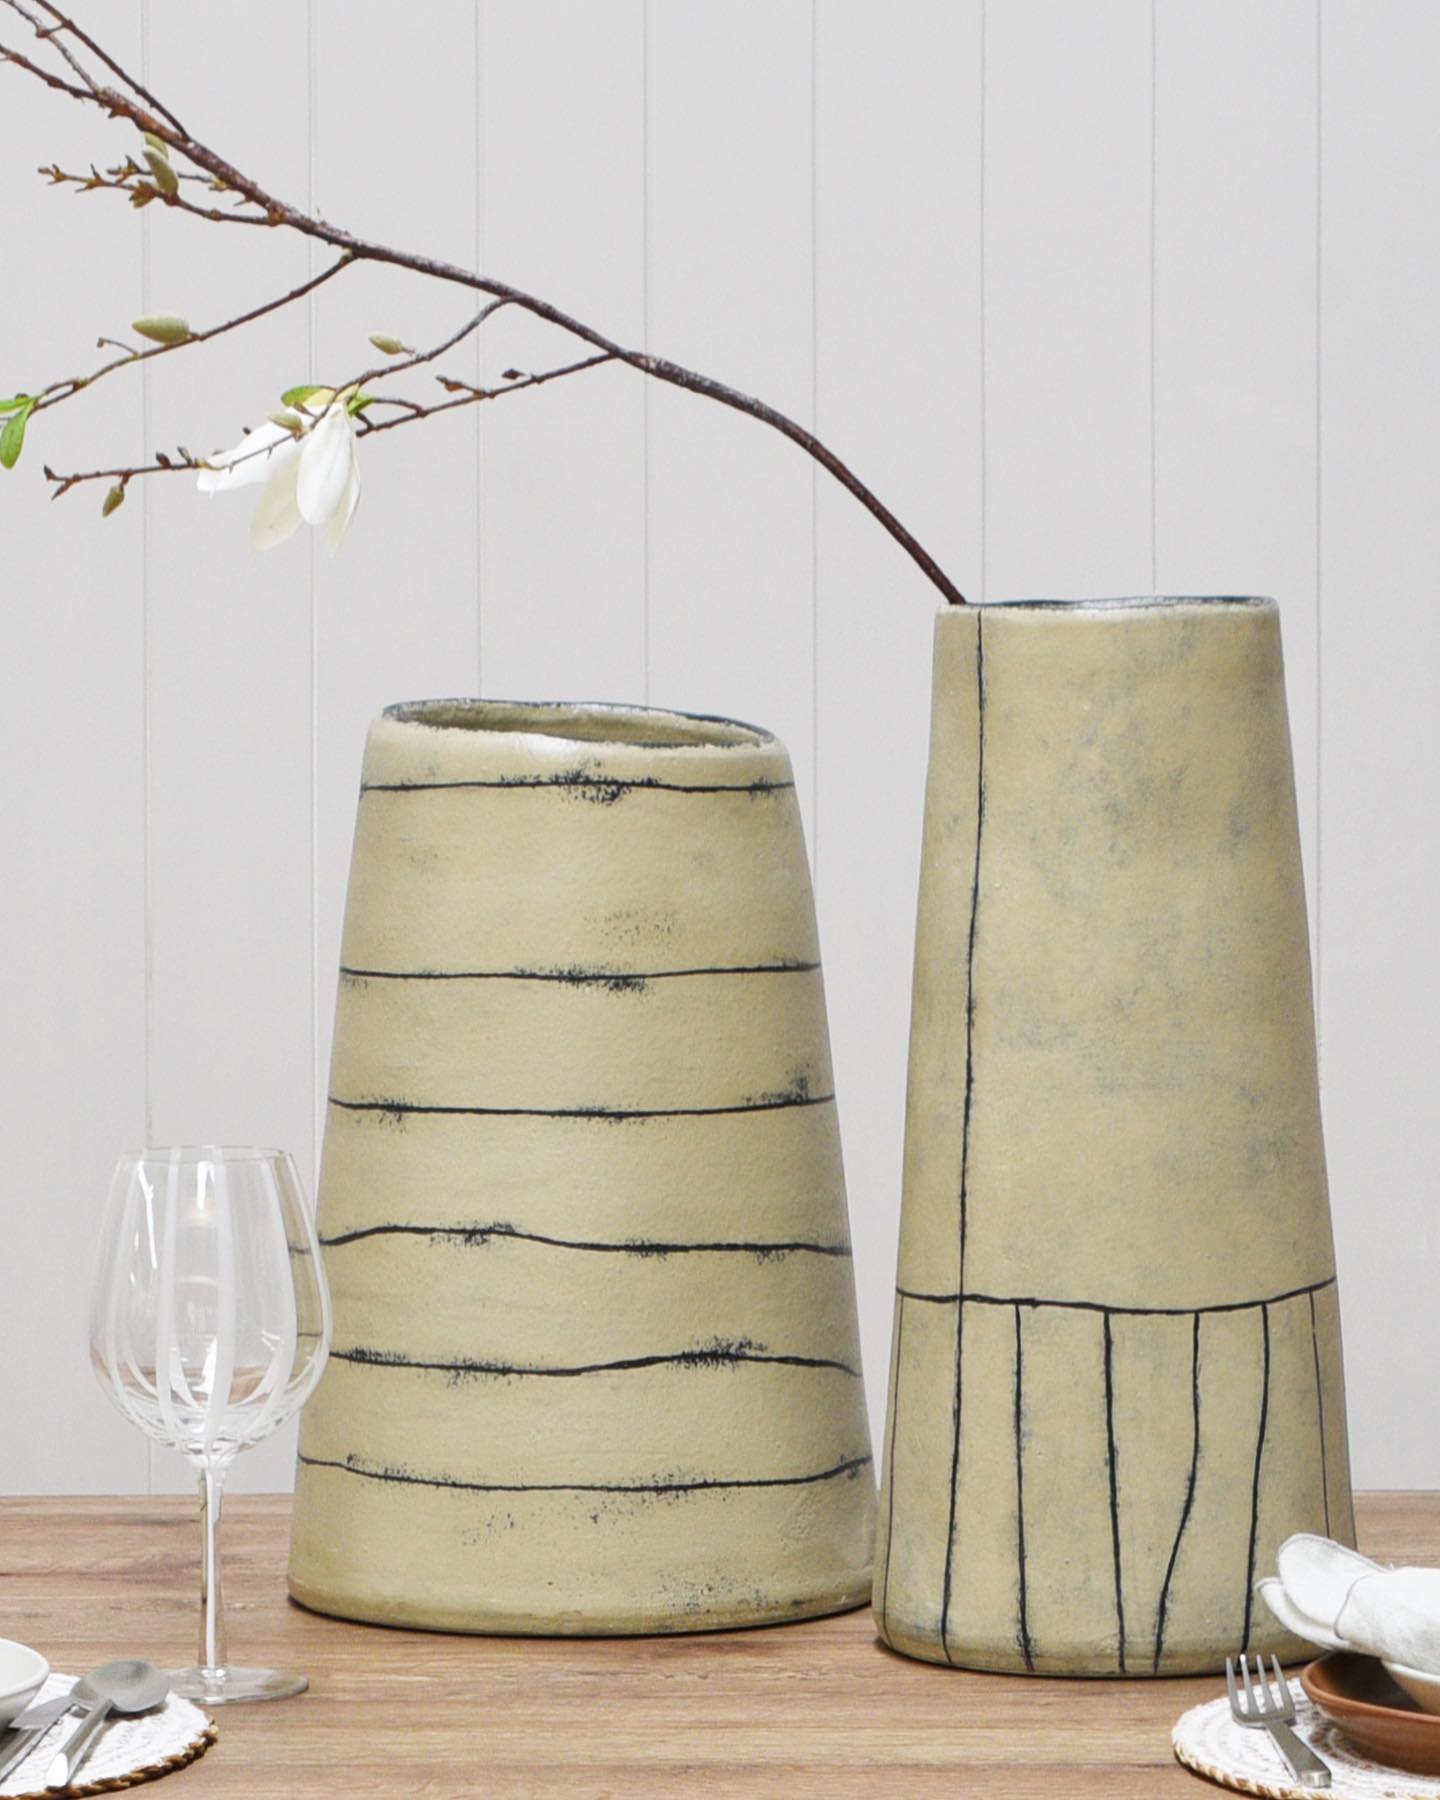 Hand-thrown by our potters, these IRIS slab vases create a statement piece.
Wonderful with fresh or dried flowers or a simple arrangement of branches.
Or just enjoy.
.
.
#terracotta #vases #vase #slabvases #pottery #statementpiece